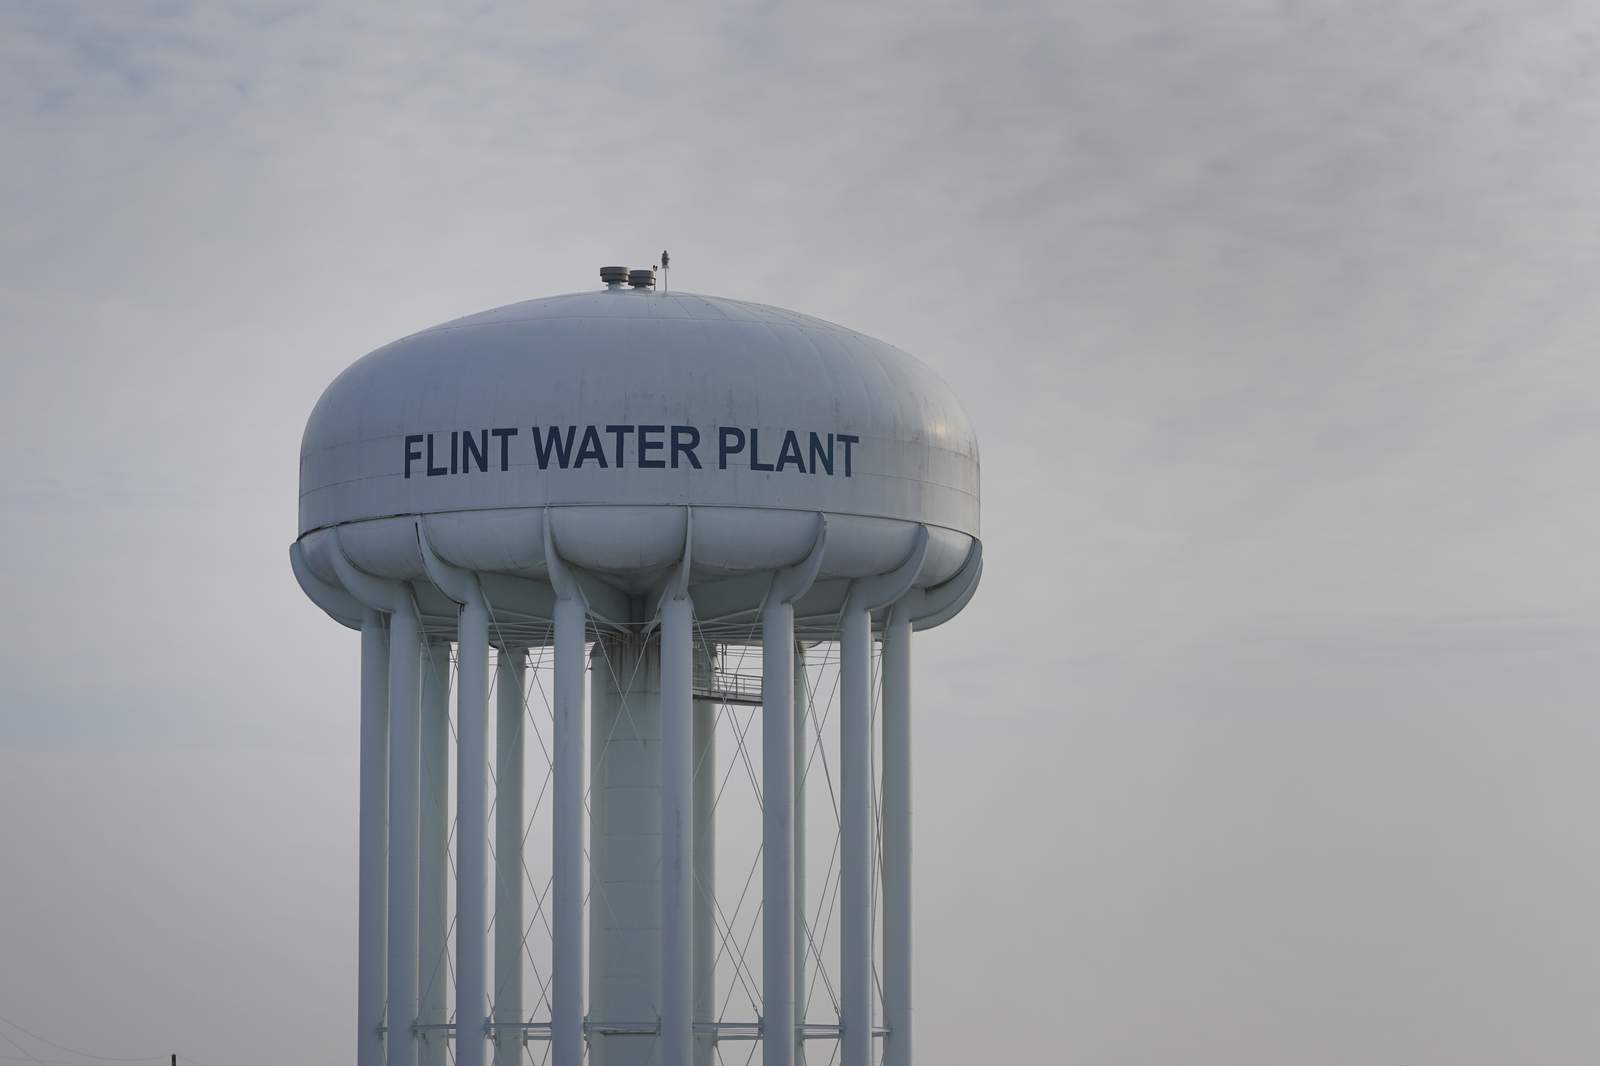 Judge gives preliminary OK to $641M Flint water deal